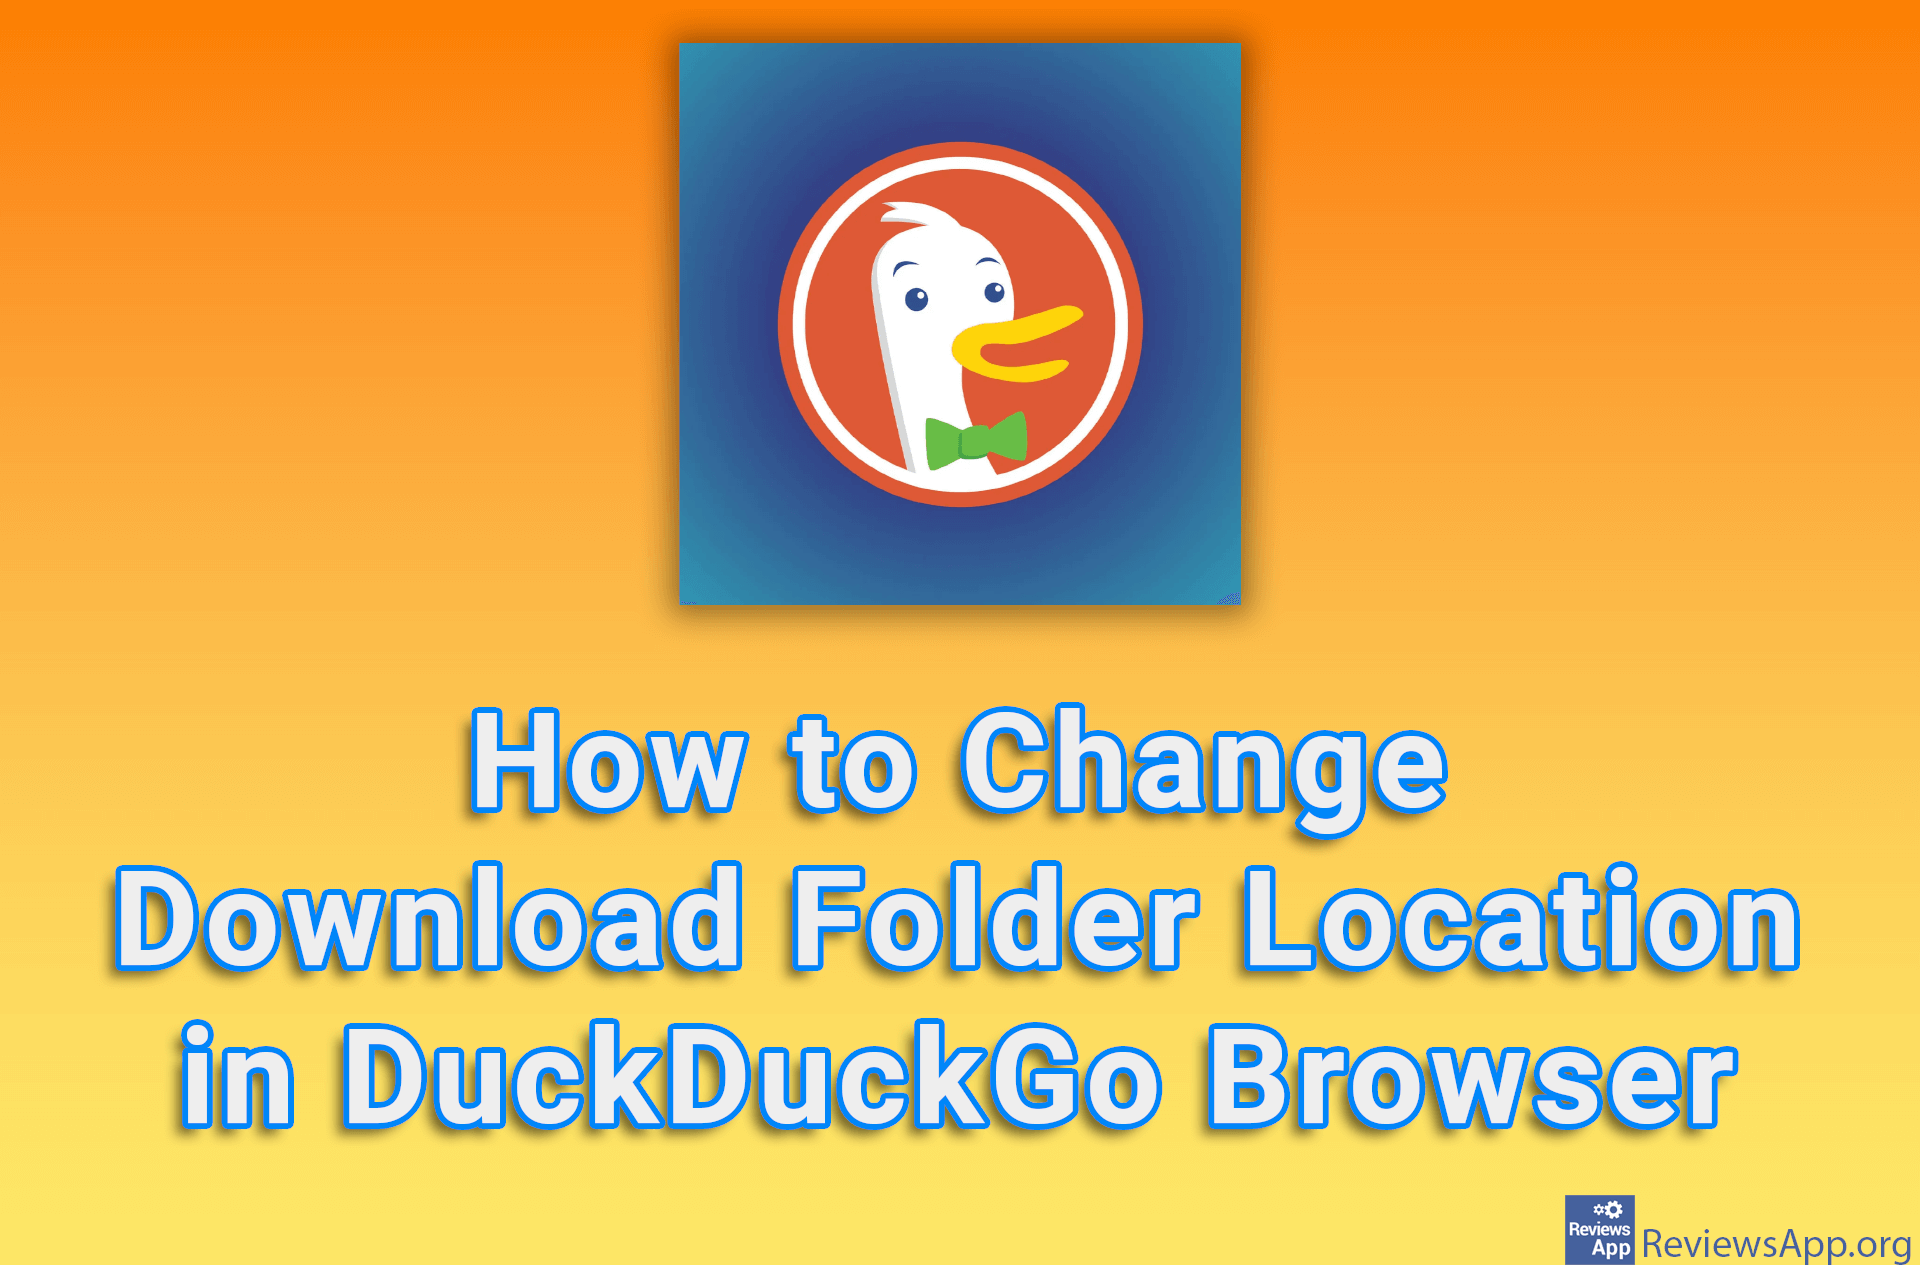 How to Change Download Folder Location in DuckDuckGo Browser